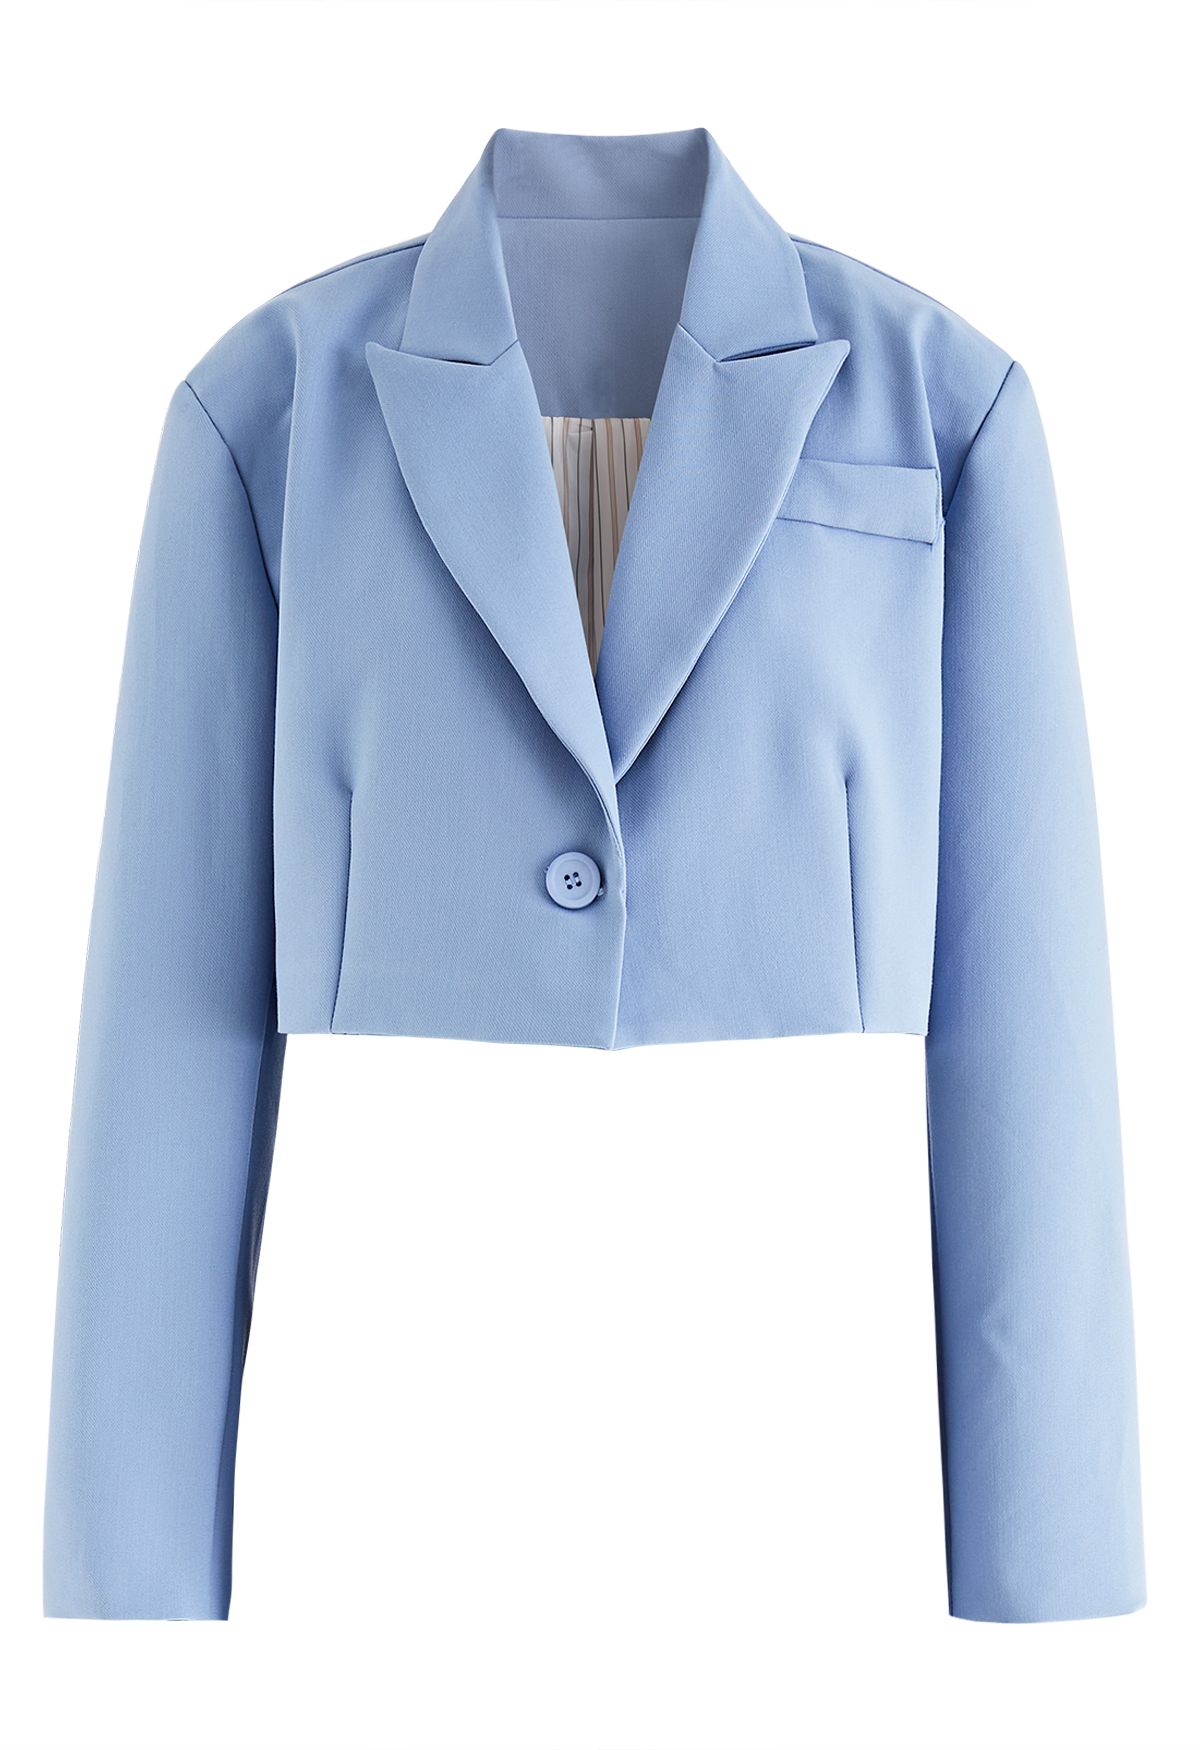 Fascinating Notch Lapel Cropped Blazer in Blue - Retro, Indie and ...